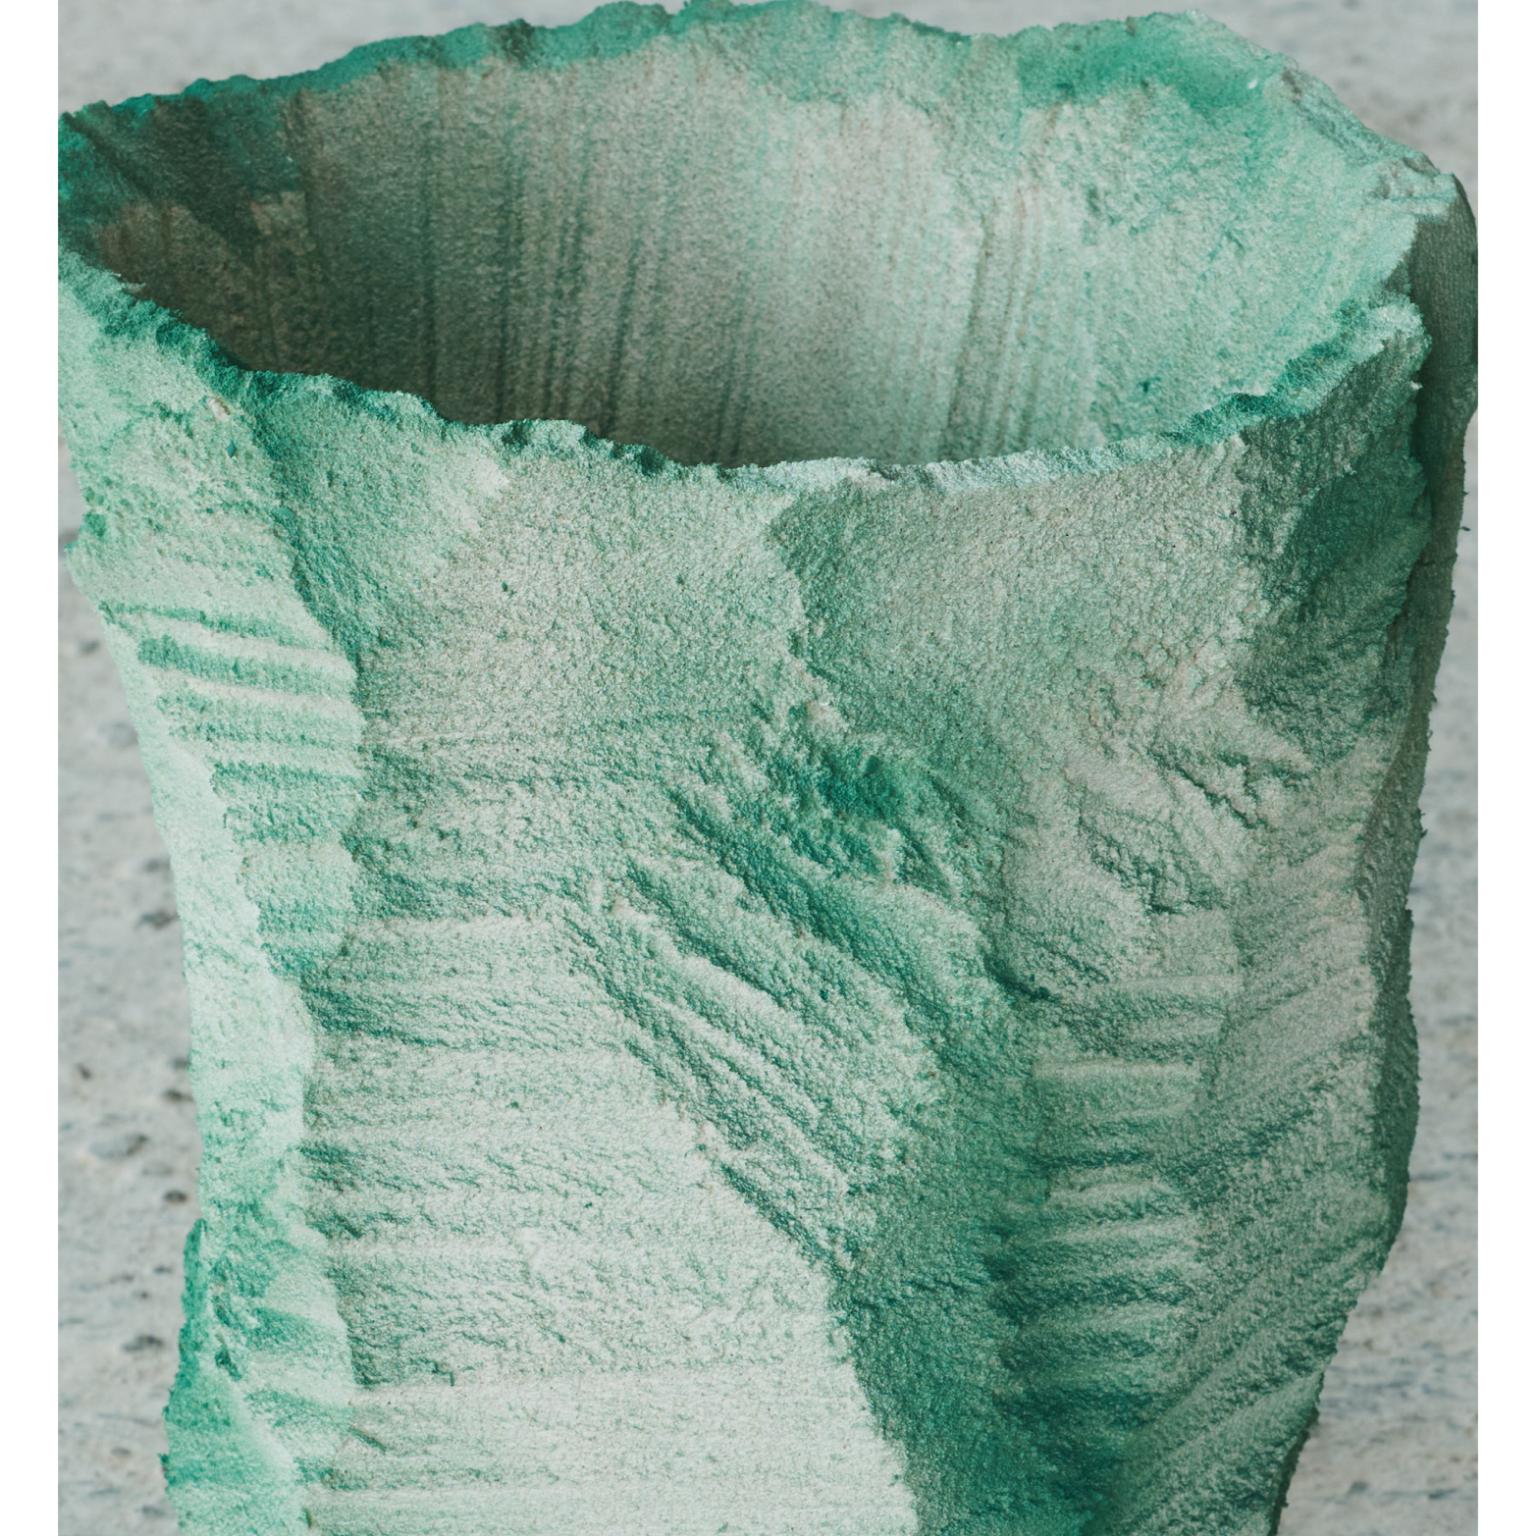 Moss vase by Andredottir & Bobek
Dimensions: W 50 x H 30 cm
Materials: Reused foam/mattress and jesmontite hardner in color green fade

Artificial Nature is a collaboration between the artist and design duo Josephine Andredottir and Emilie